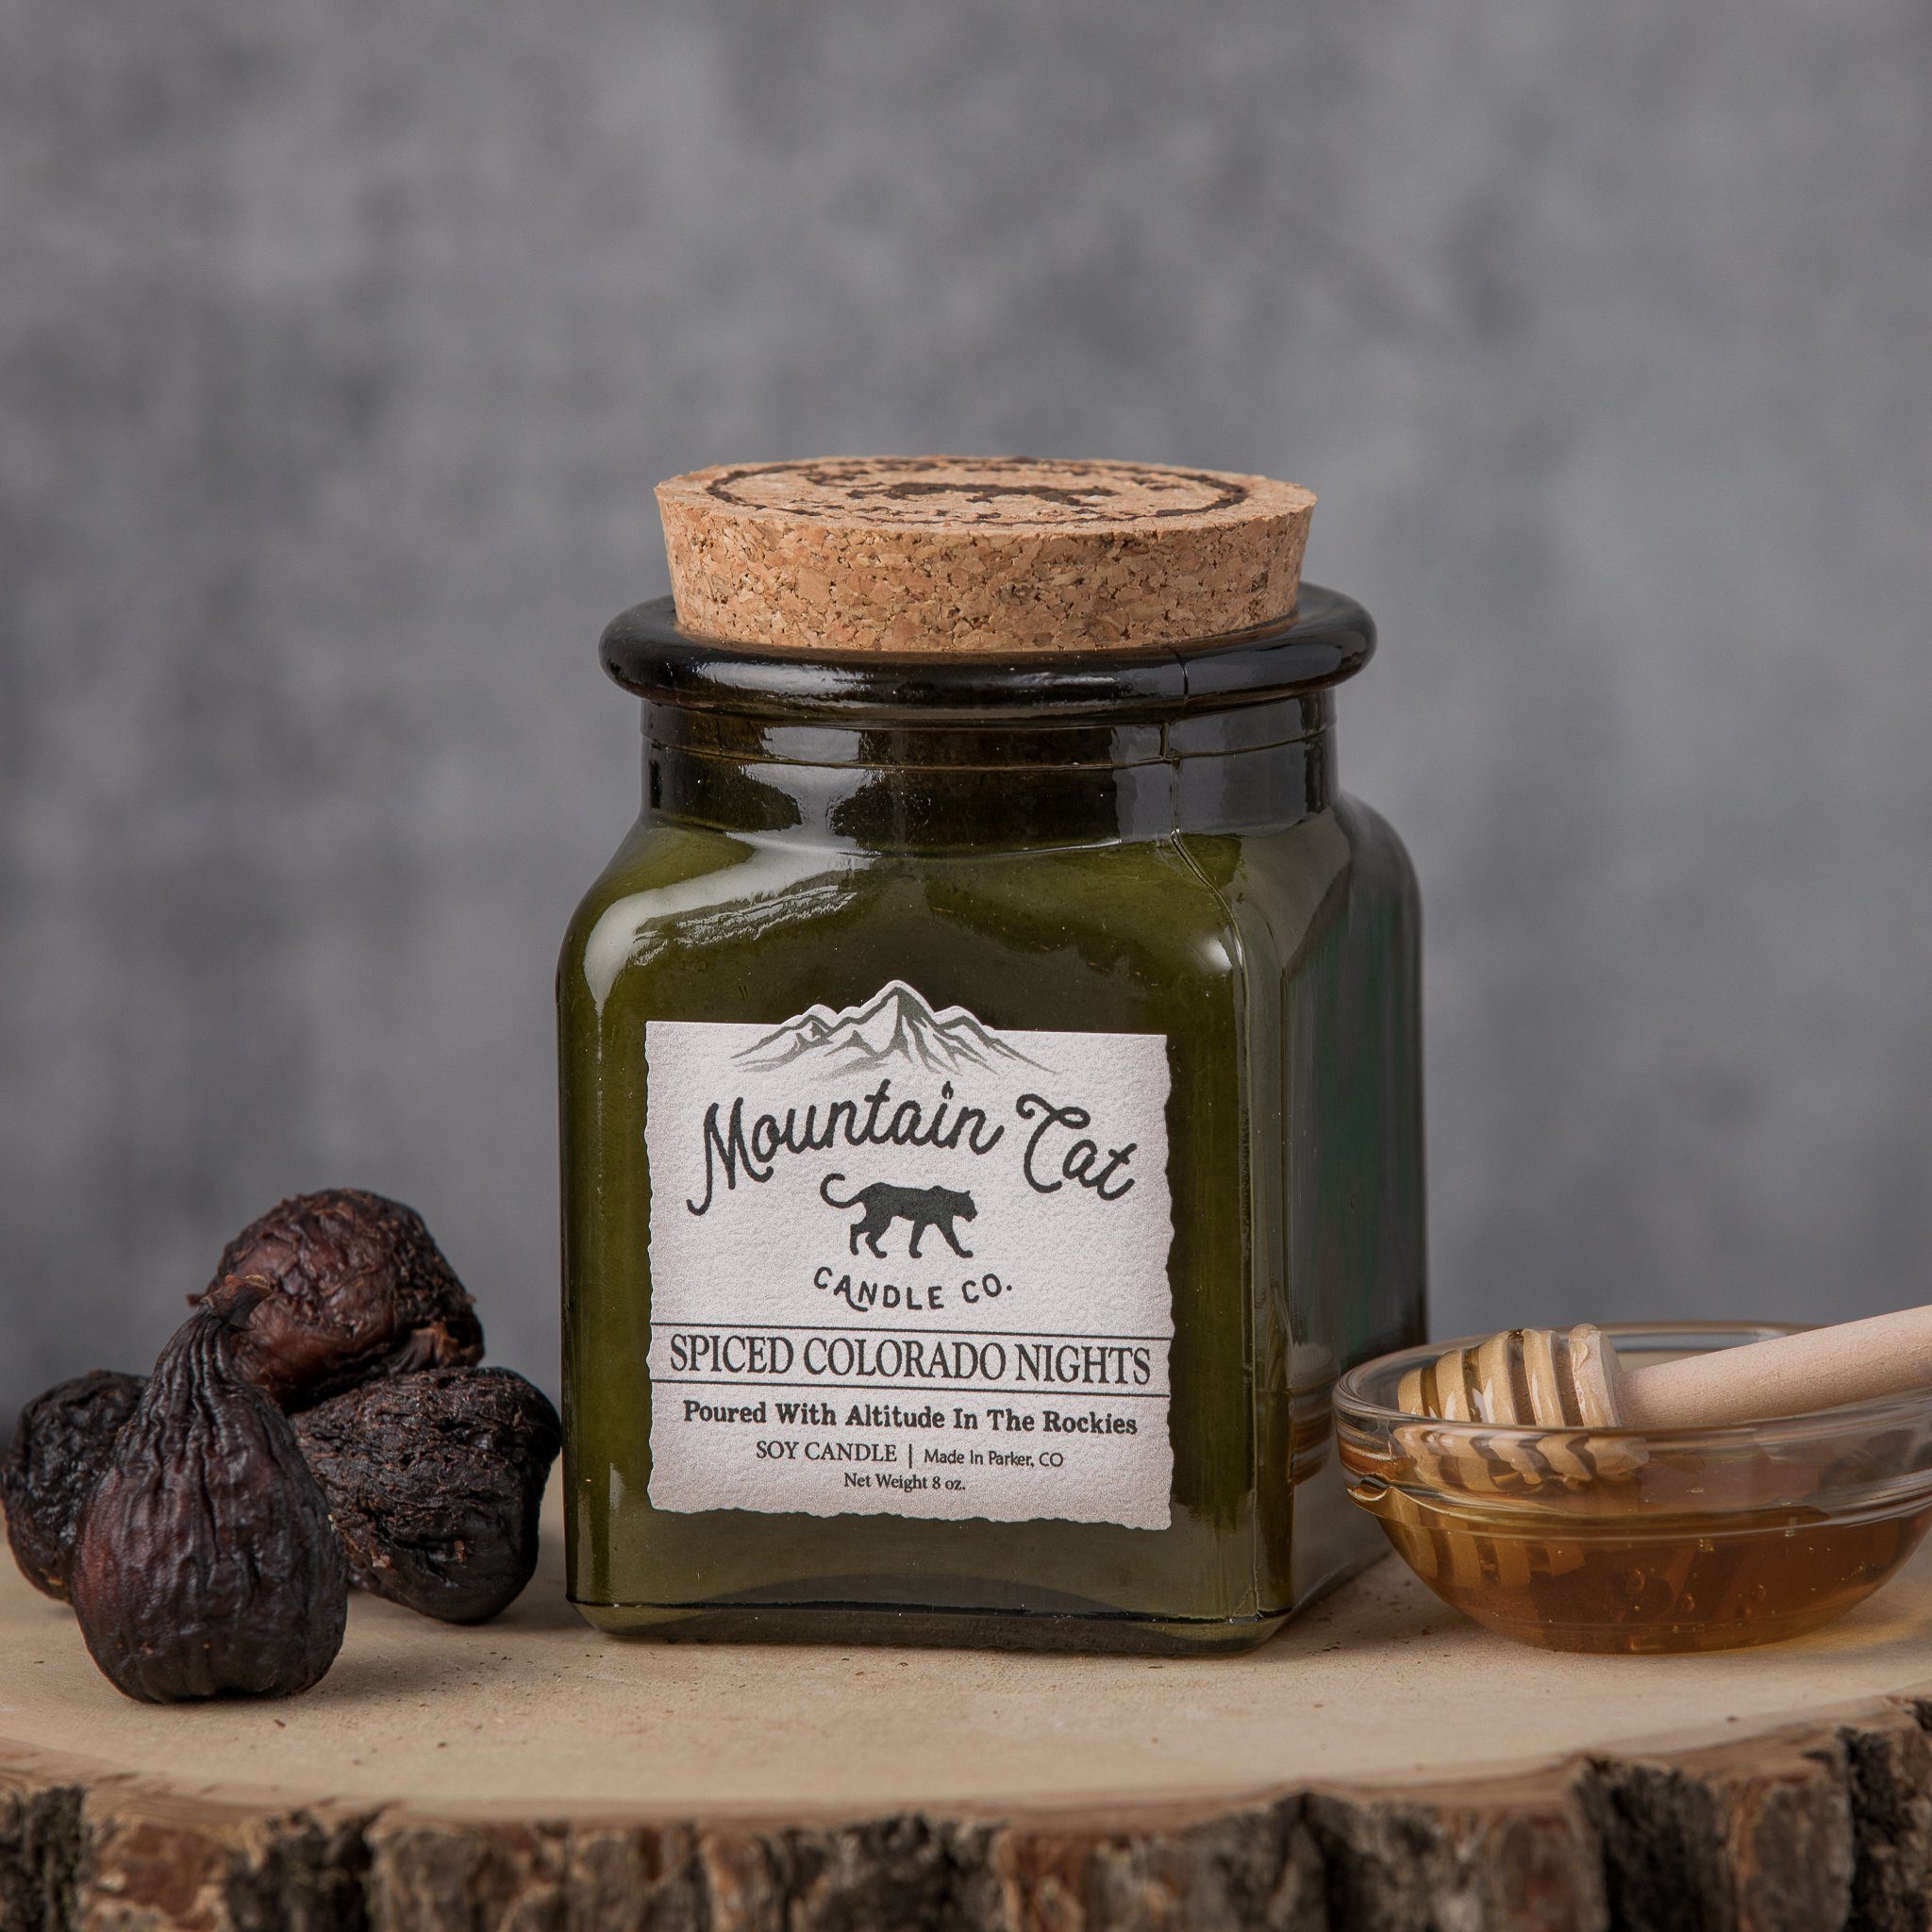 Spiced Colorado Nights - Rustic Cabin Collection Candles Mountain Cat Candle Co Vintage Green Jar with Cork Lid 